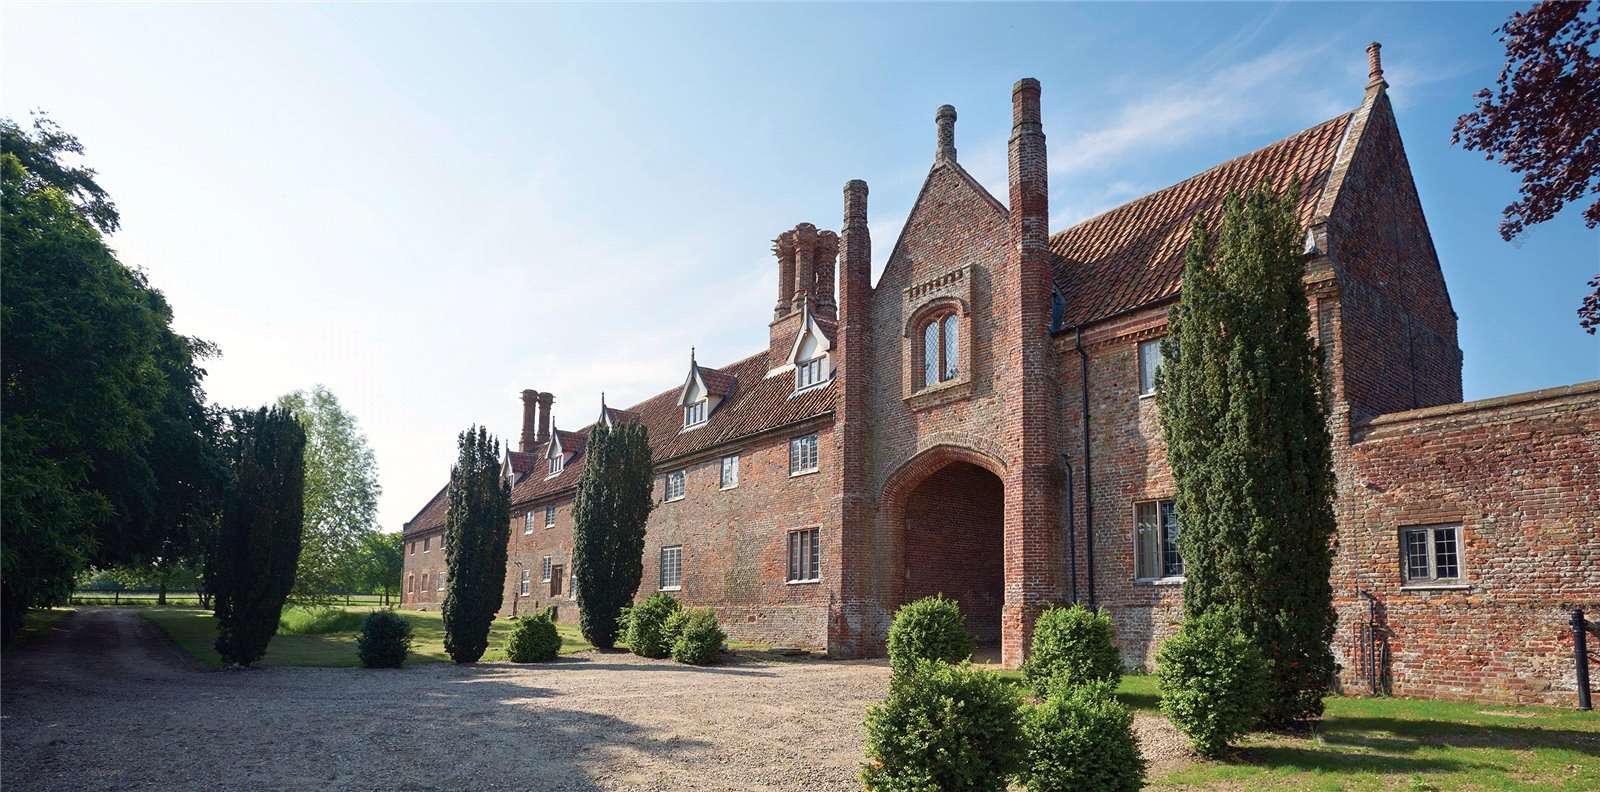 A glorious medieval hall in Norfolk with England’s largest brick-built Tudor barn, a moat, and nine acres